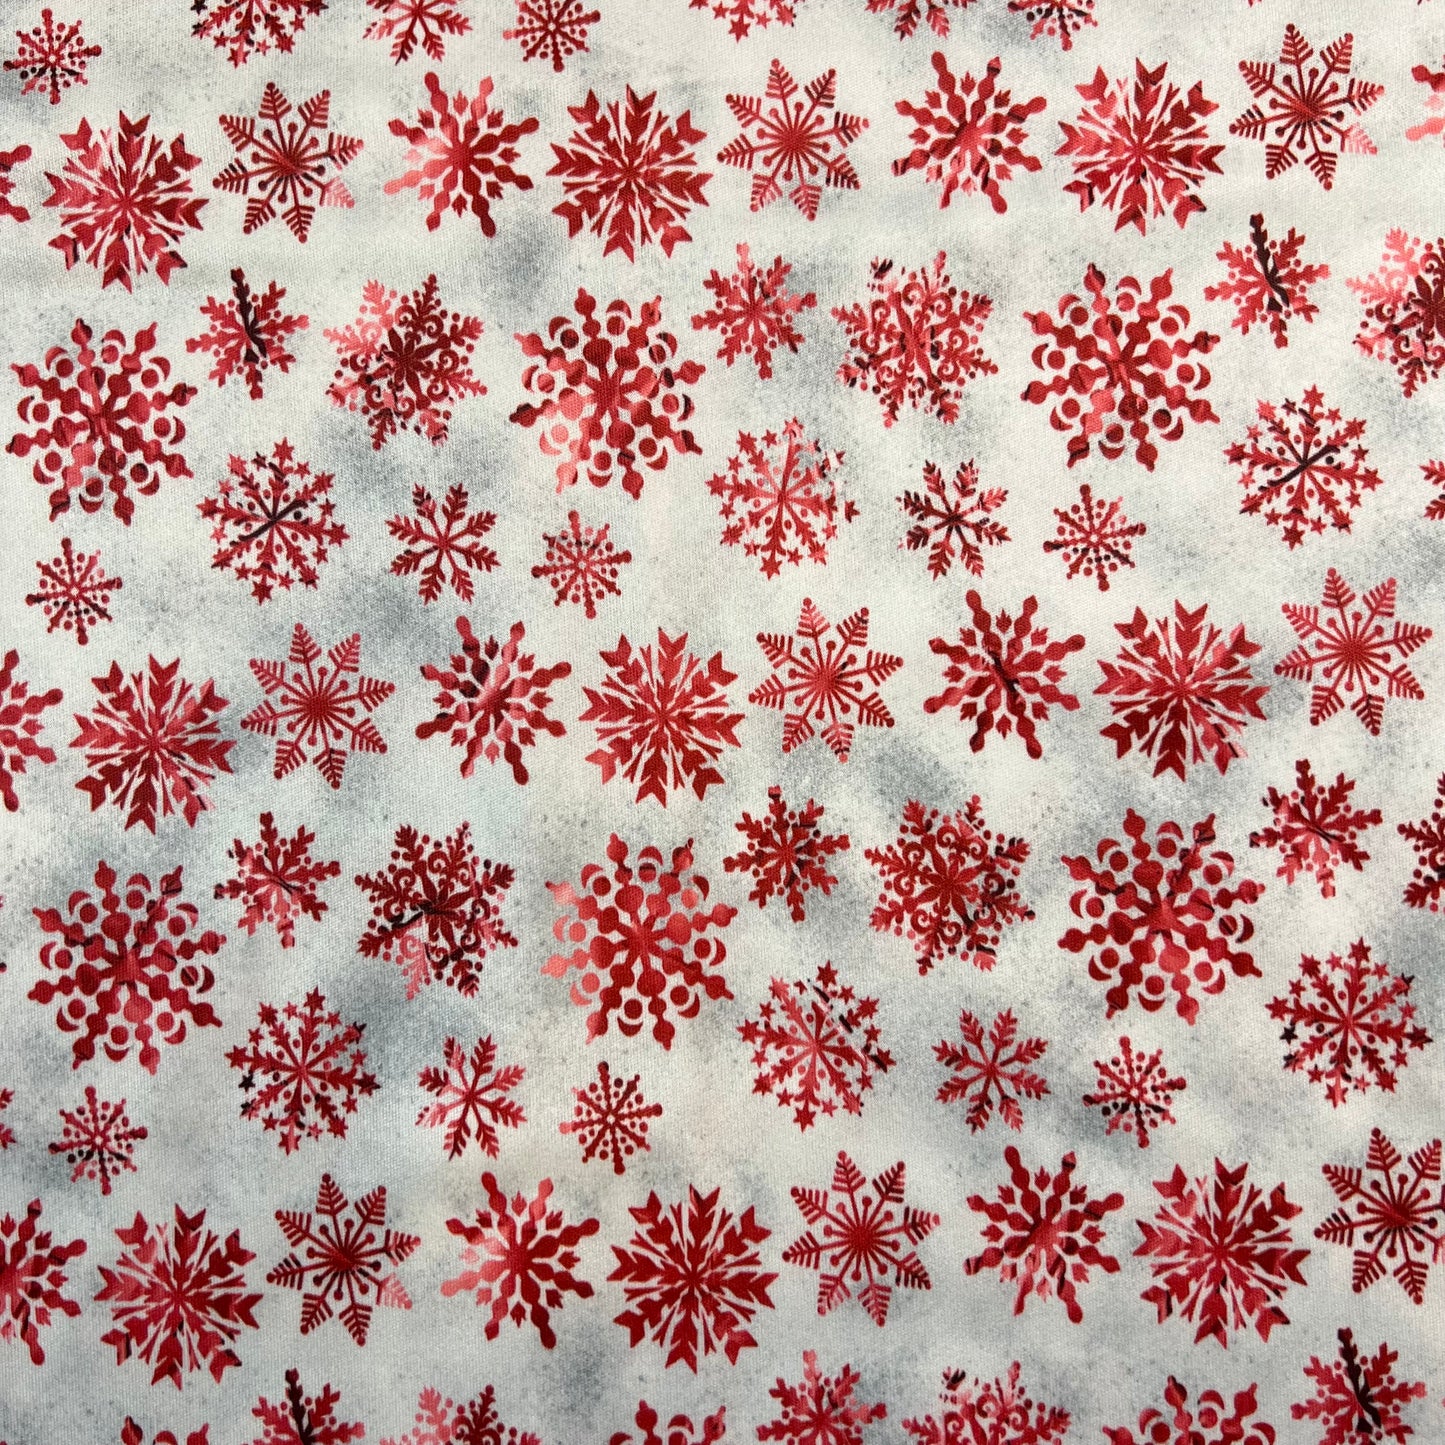 Red Snow Flakes on Grey